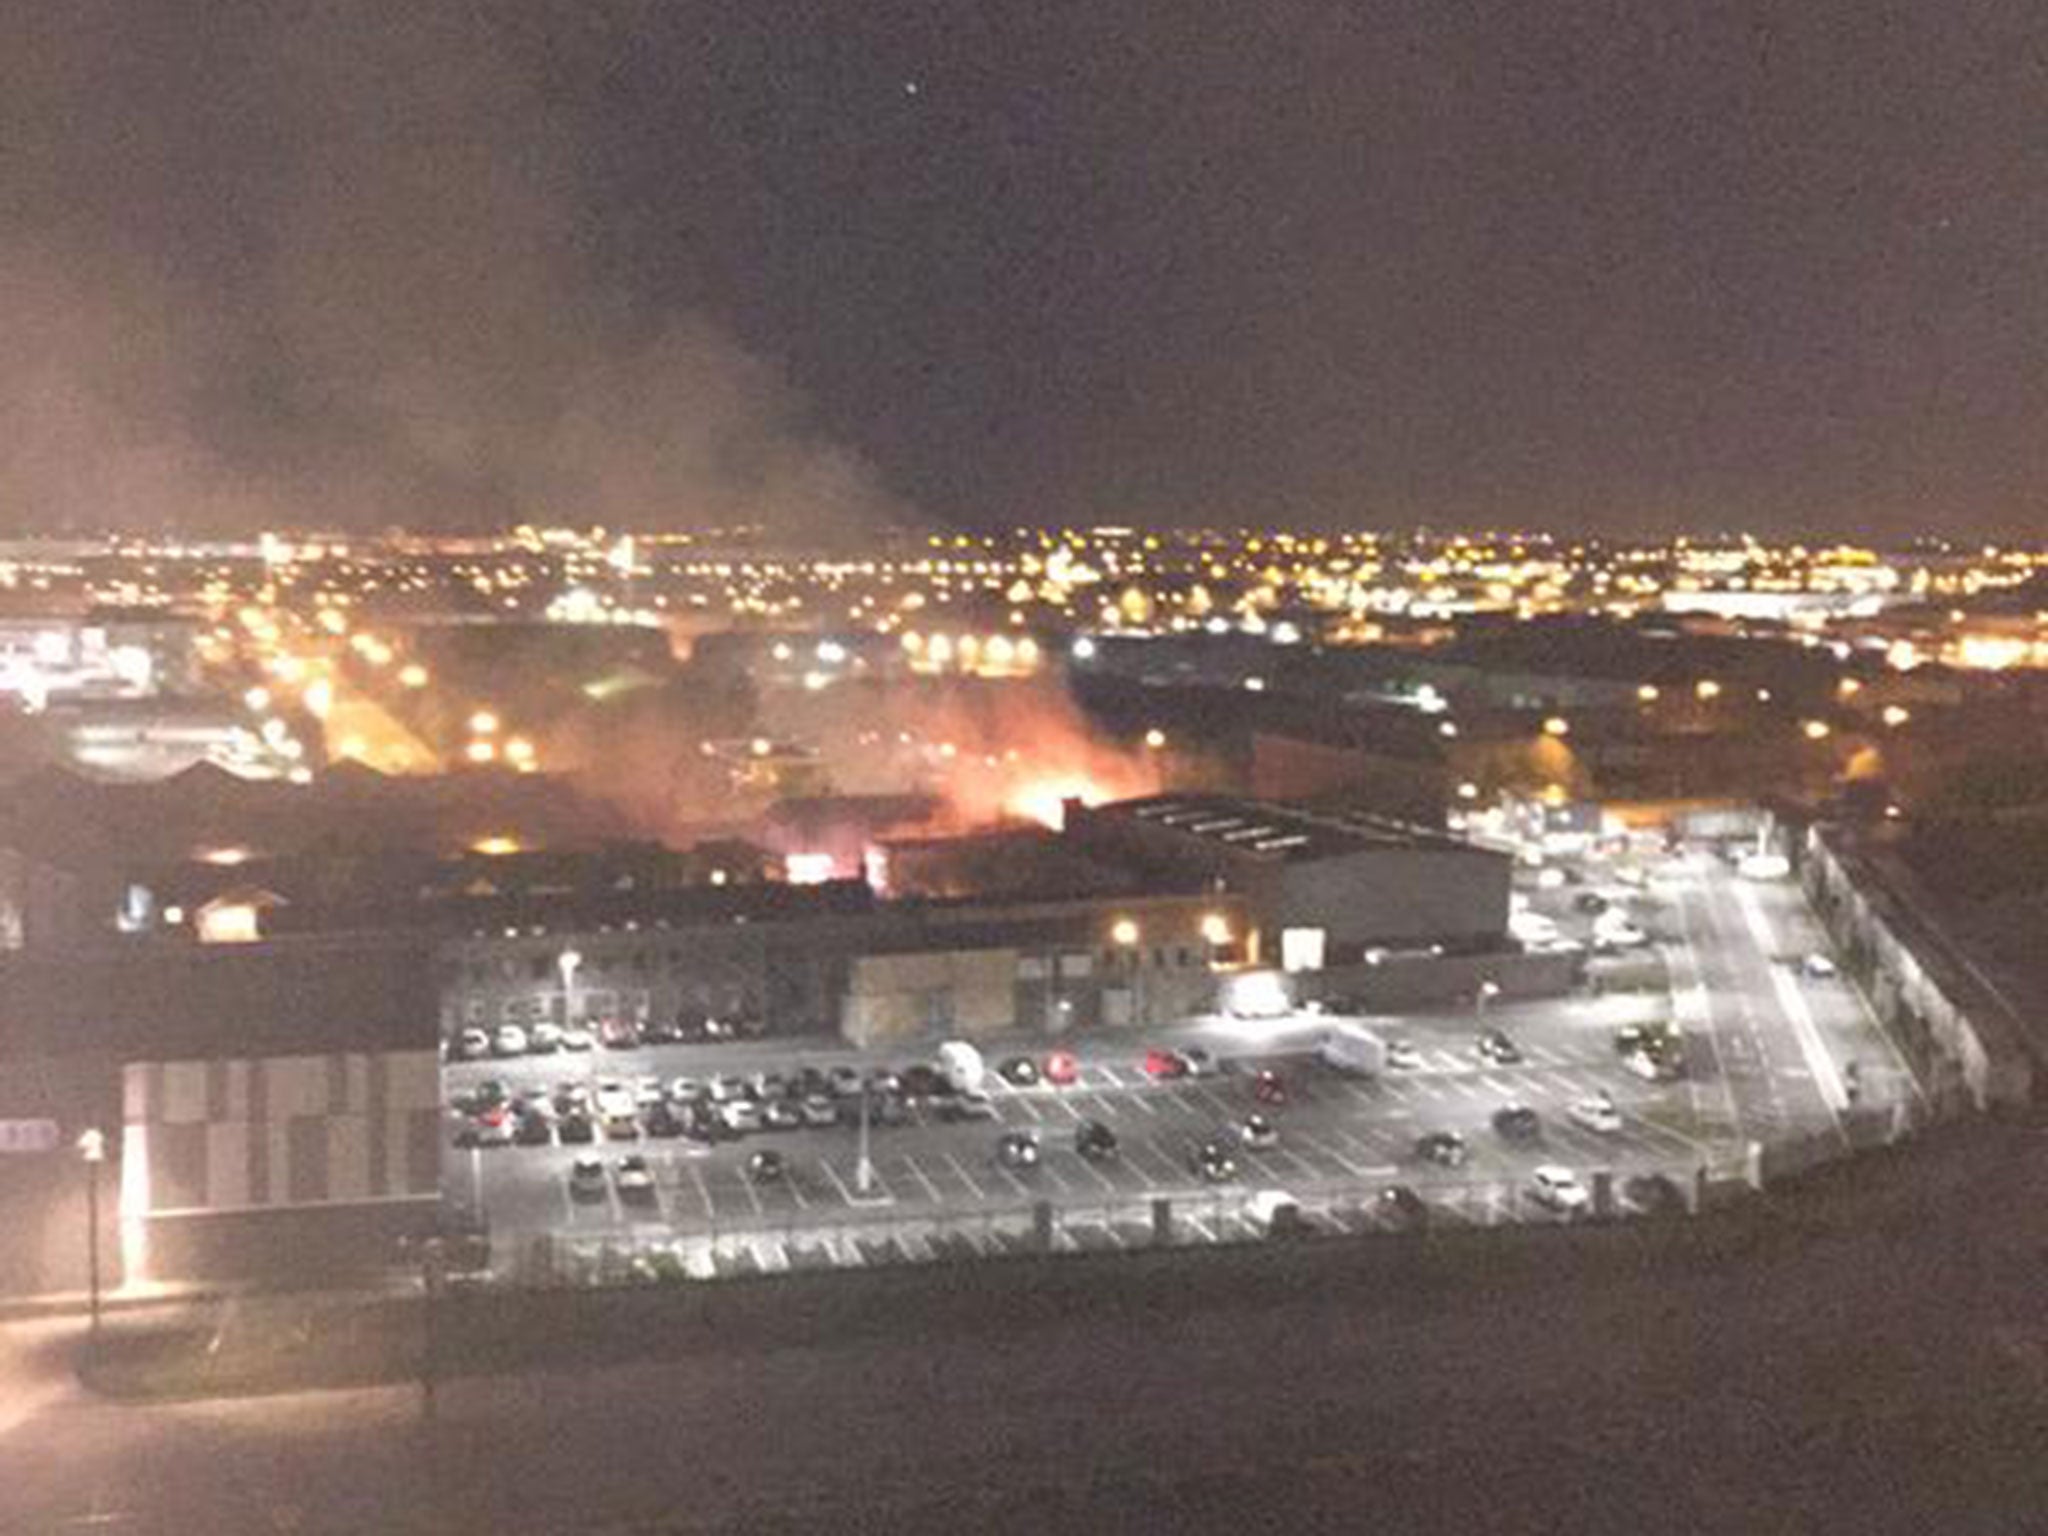 Coronation Street looks to be on fire in this picture, taken by Twitter user Stephen Ryder